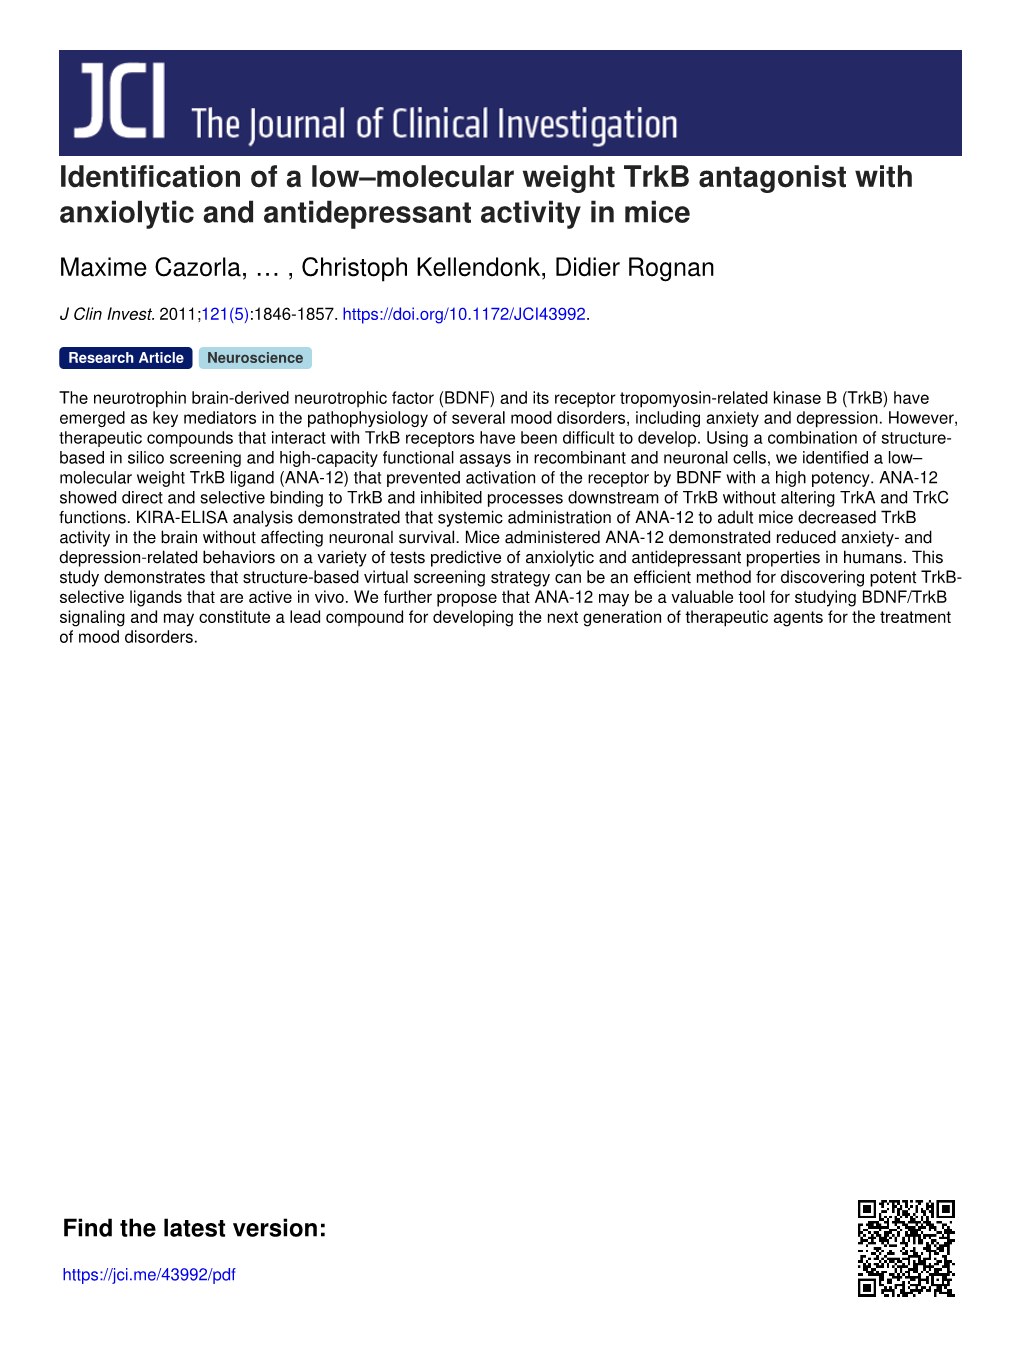 Identification of a Low–Molecular Weight Trkb Antagonist with Anxiolytic and Antidepressant Activity in Mice